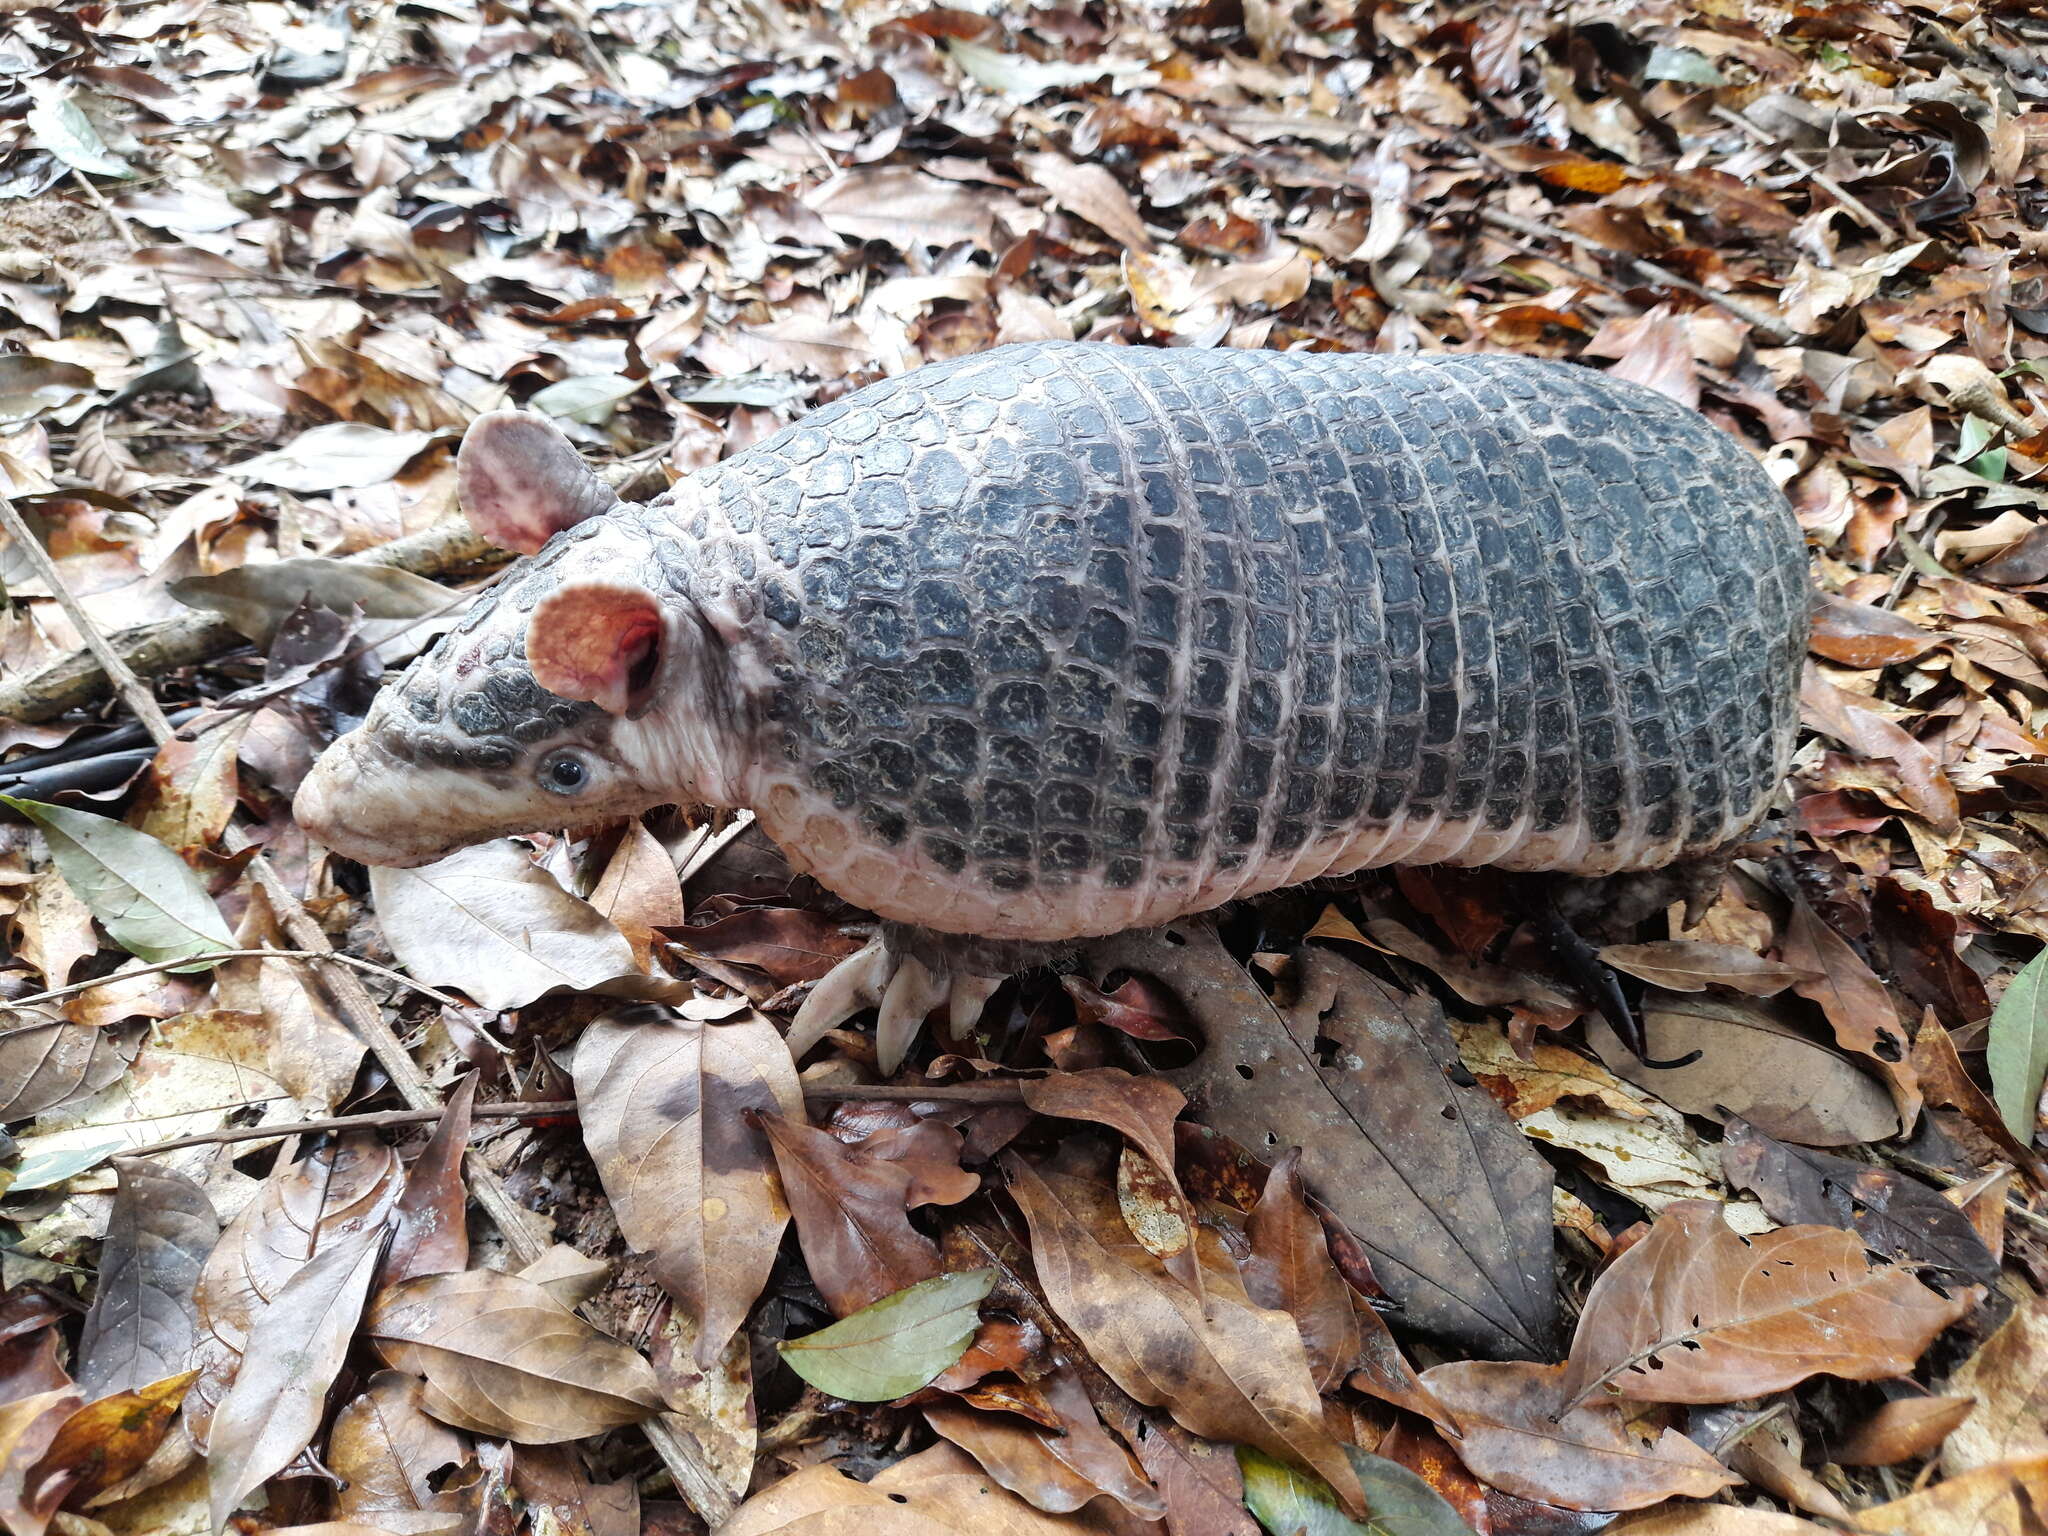 Image of naked-tailed armadillos